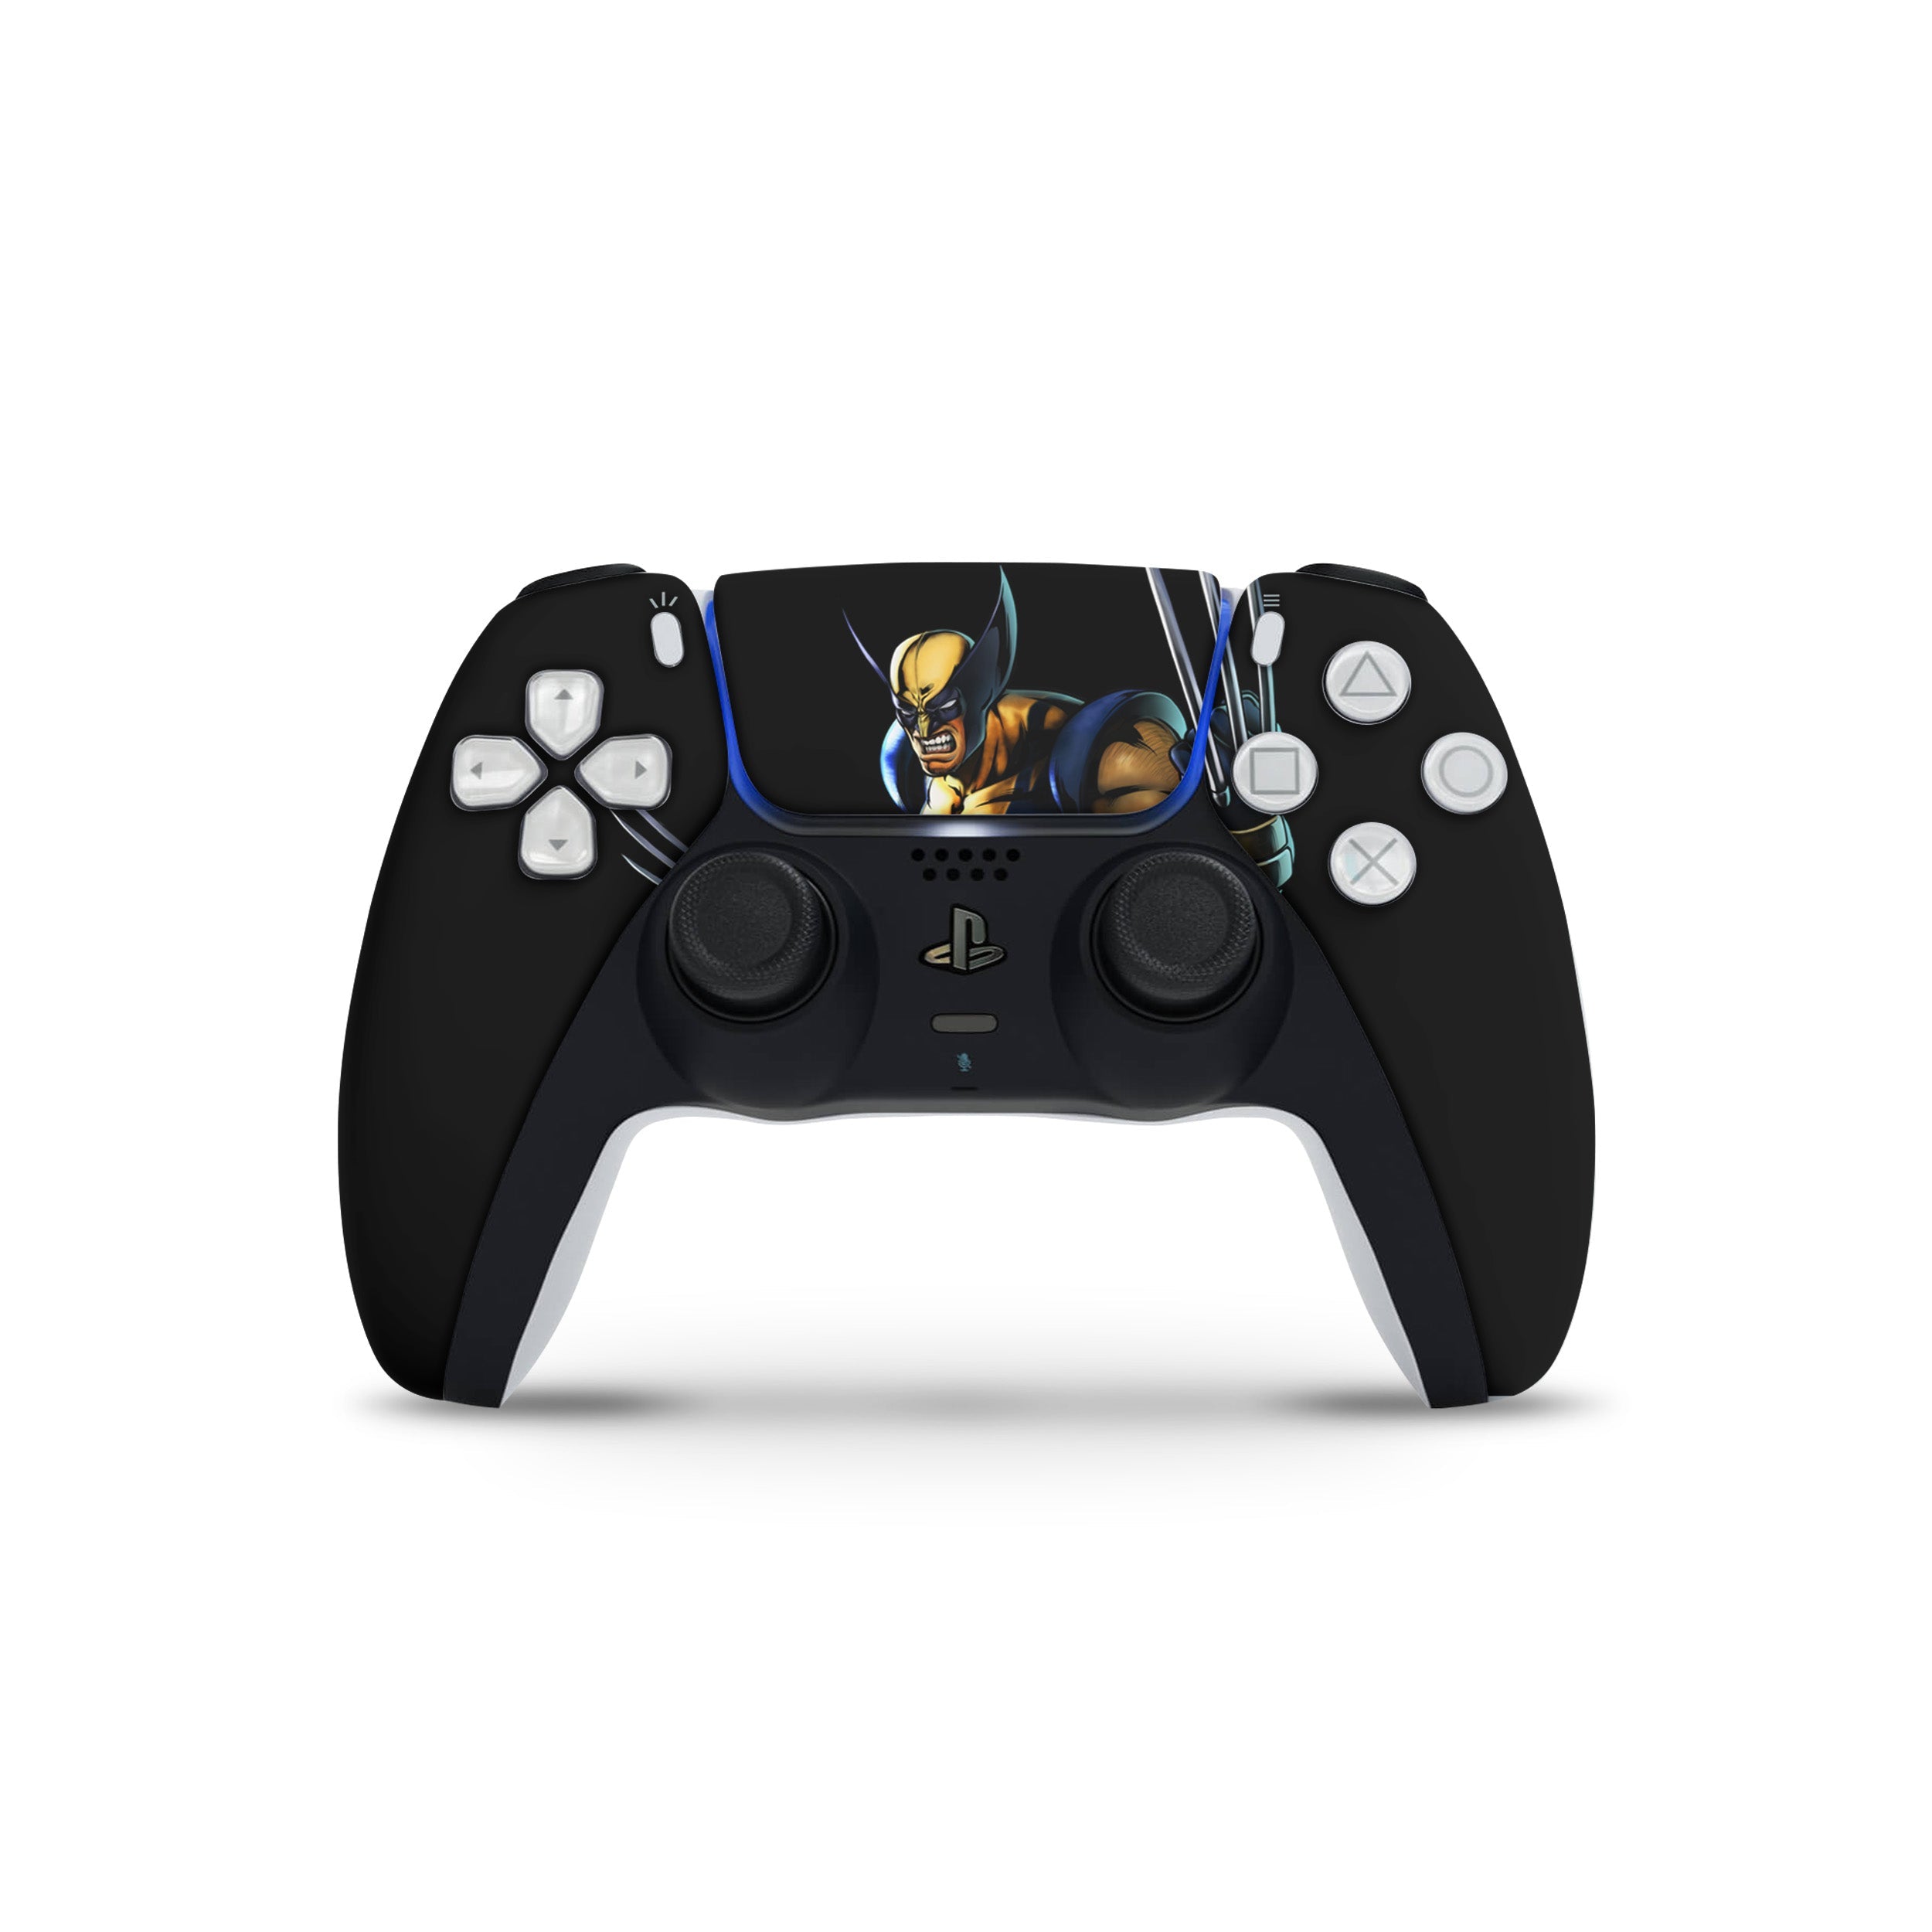 A video game skin featuring a Marvel Comics X Men Wolverine design for the PS5 DualSense Controller.